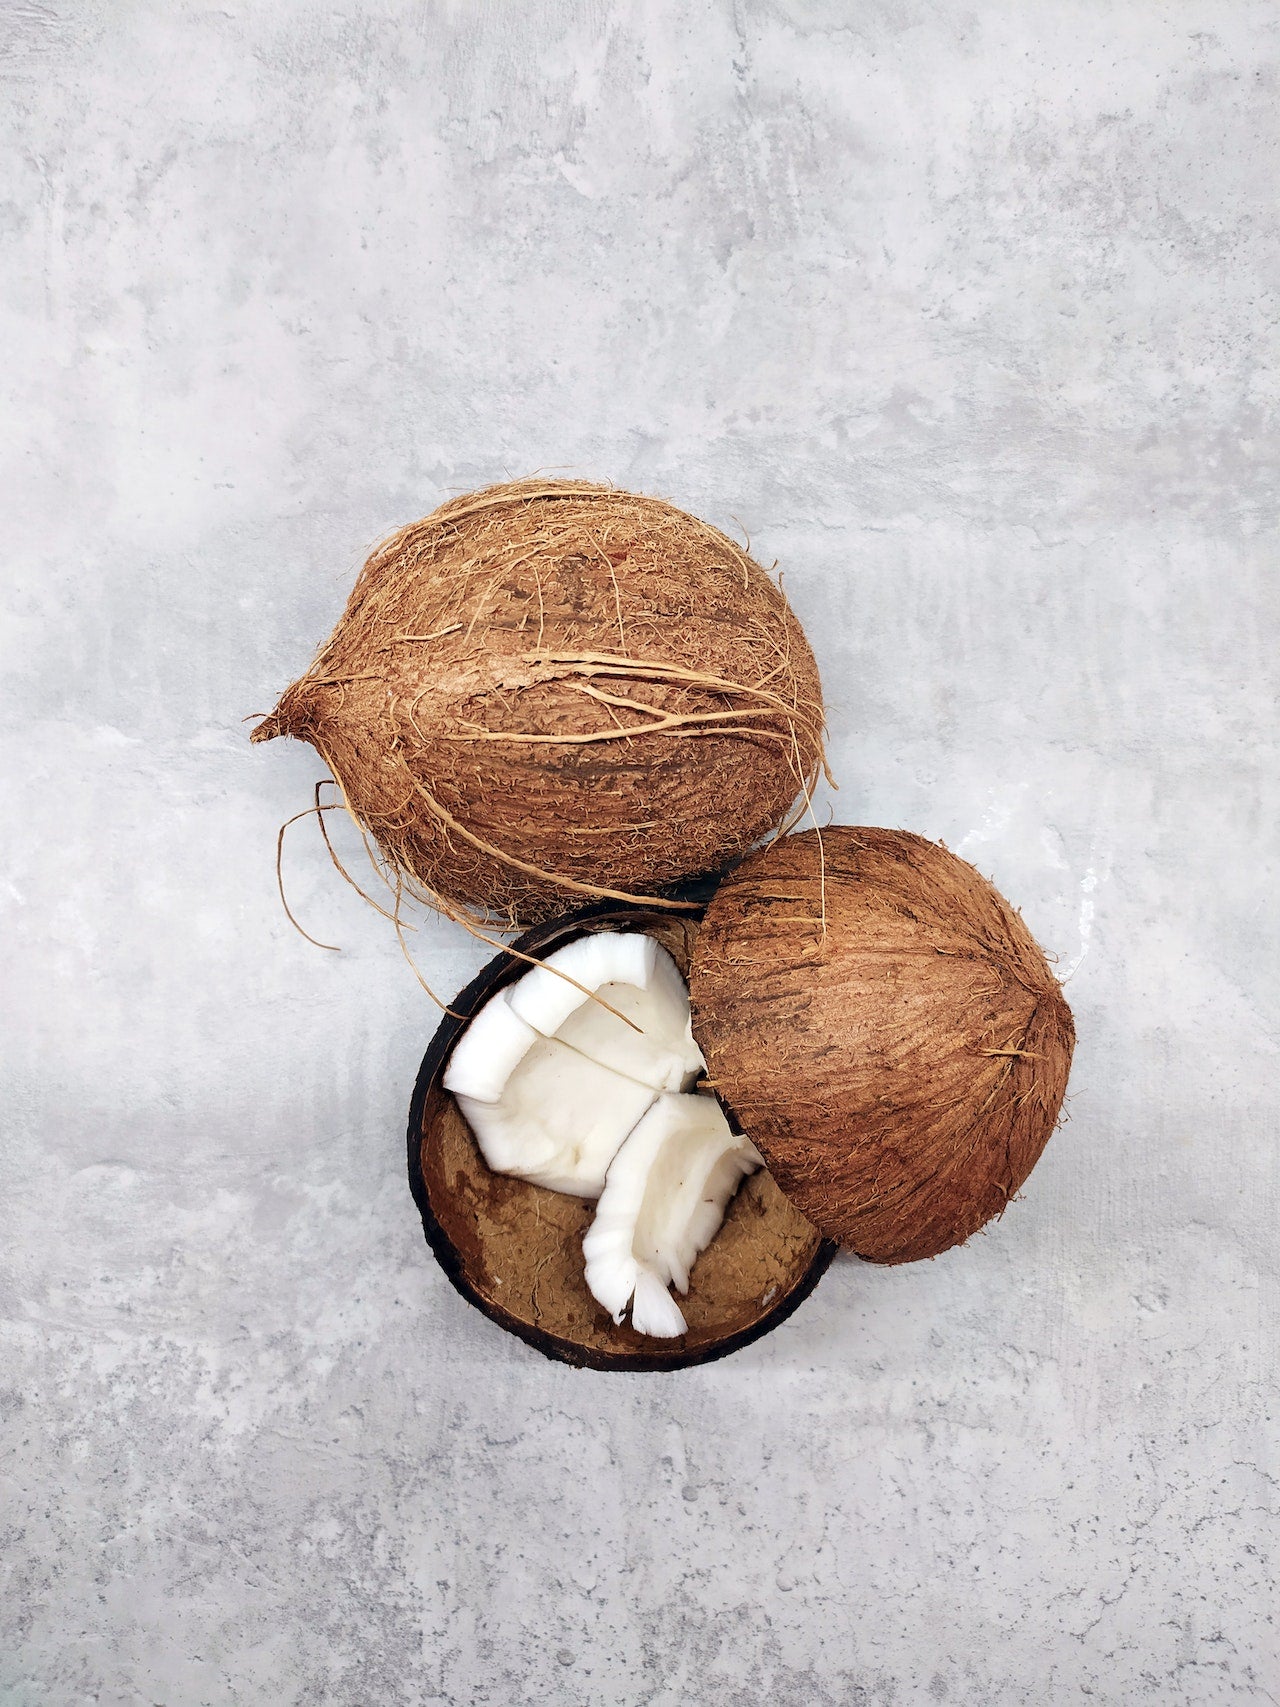 A picture of two coconuts